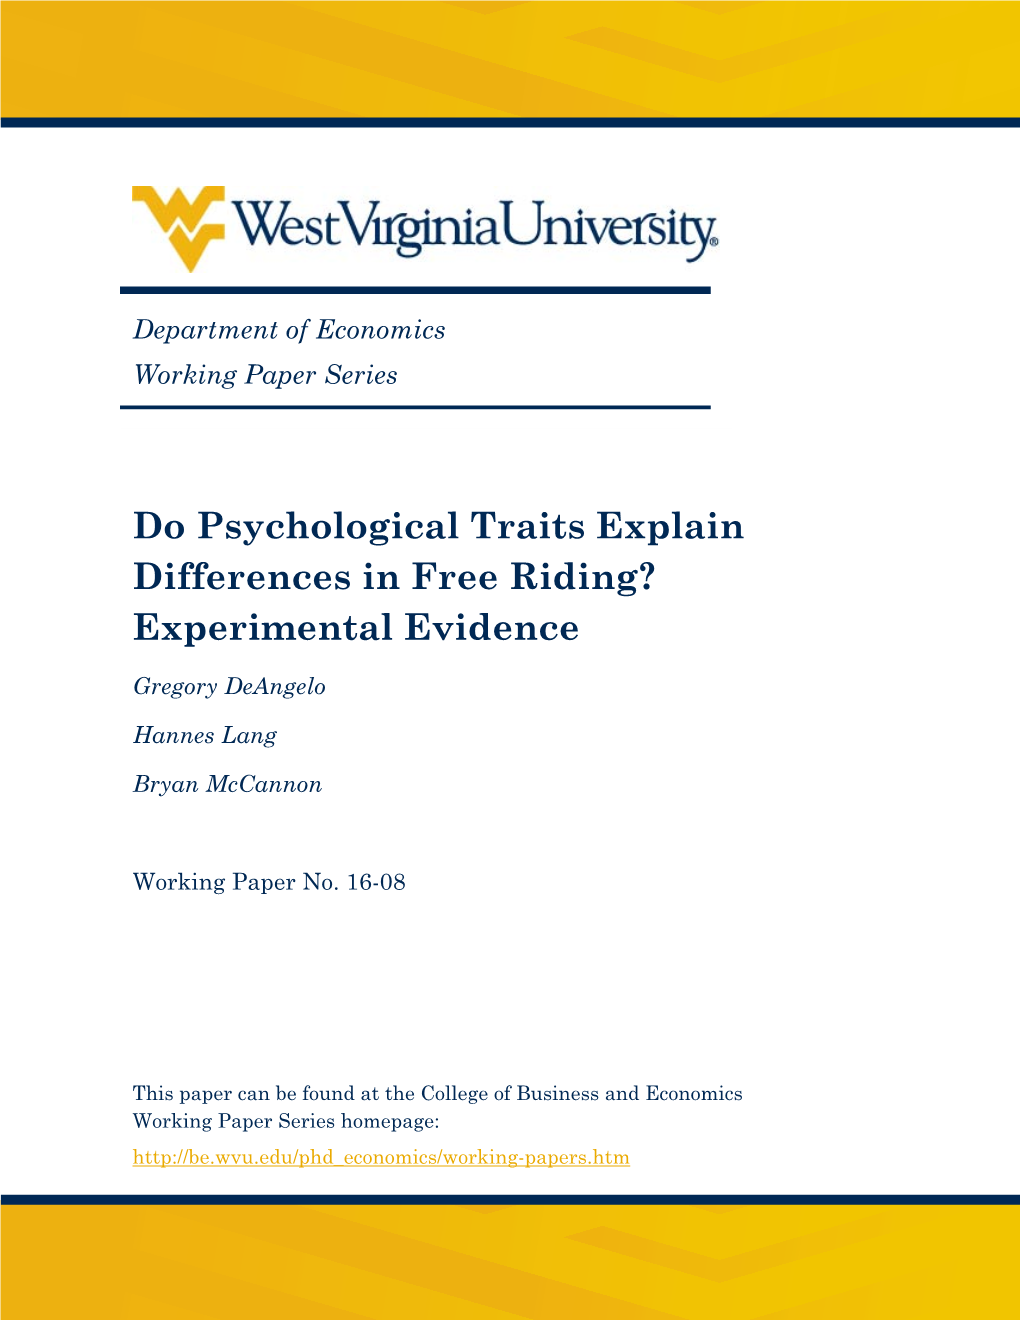 Do Psychological Traits Explain Differences in Free Riding? Experimental Evidence